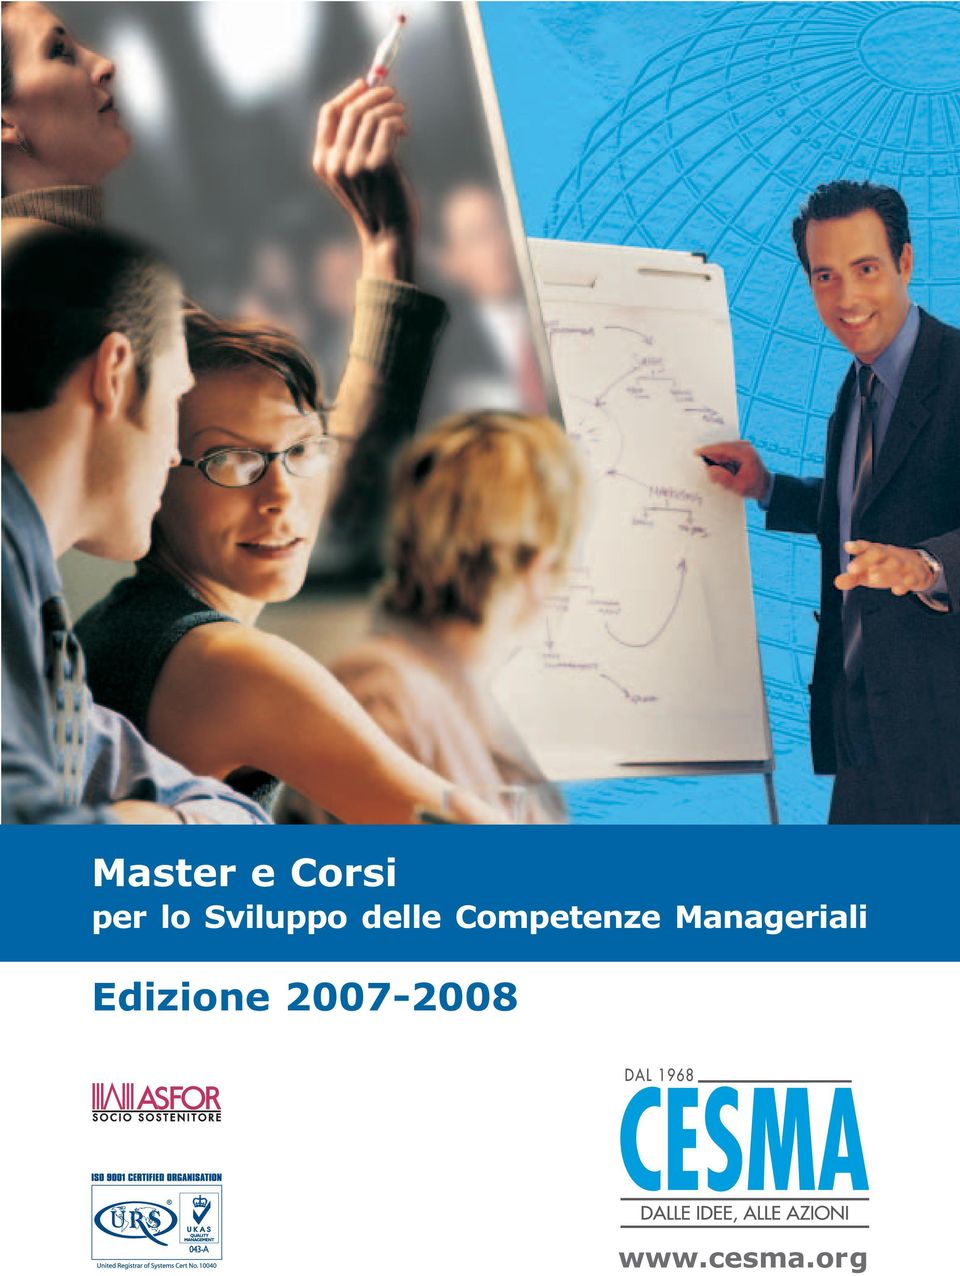 Competenze Manageriali